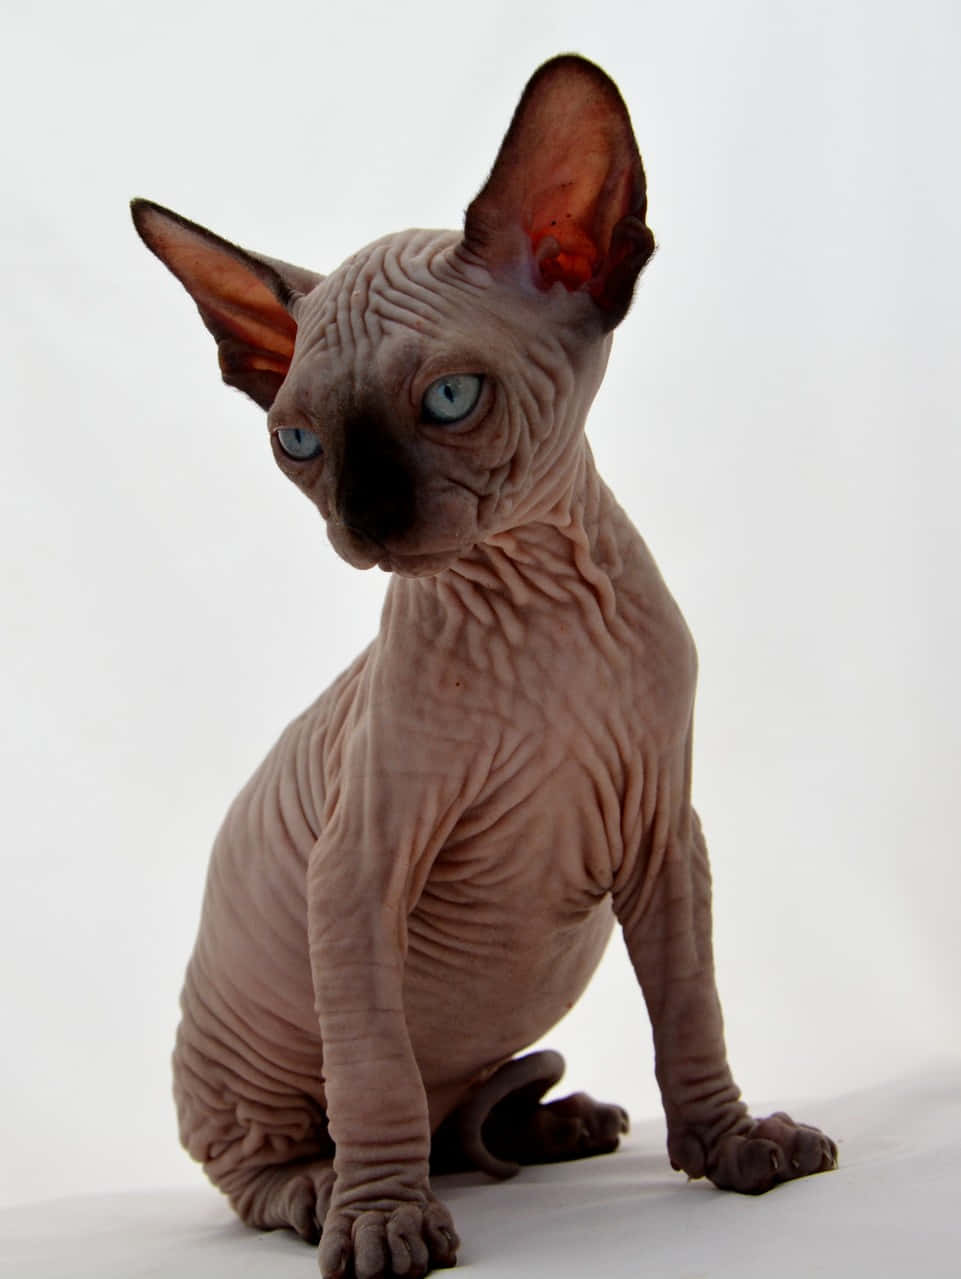 A stunning Canadian Sphynx cat with captivating eyes Wallpaper